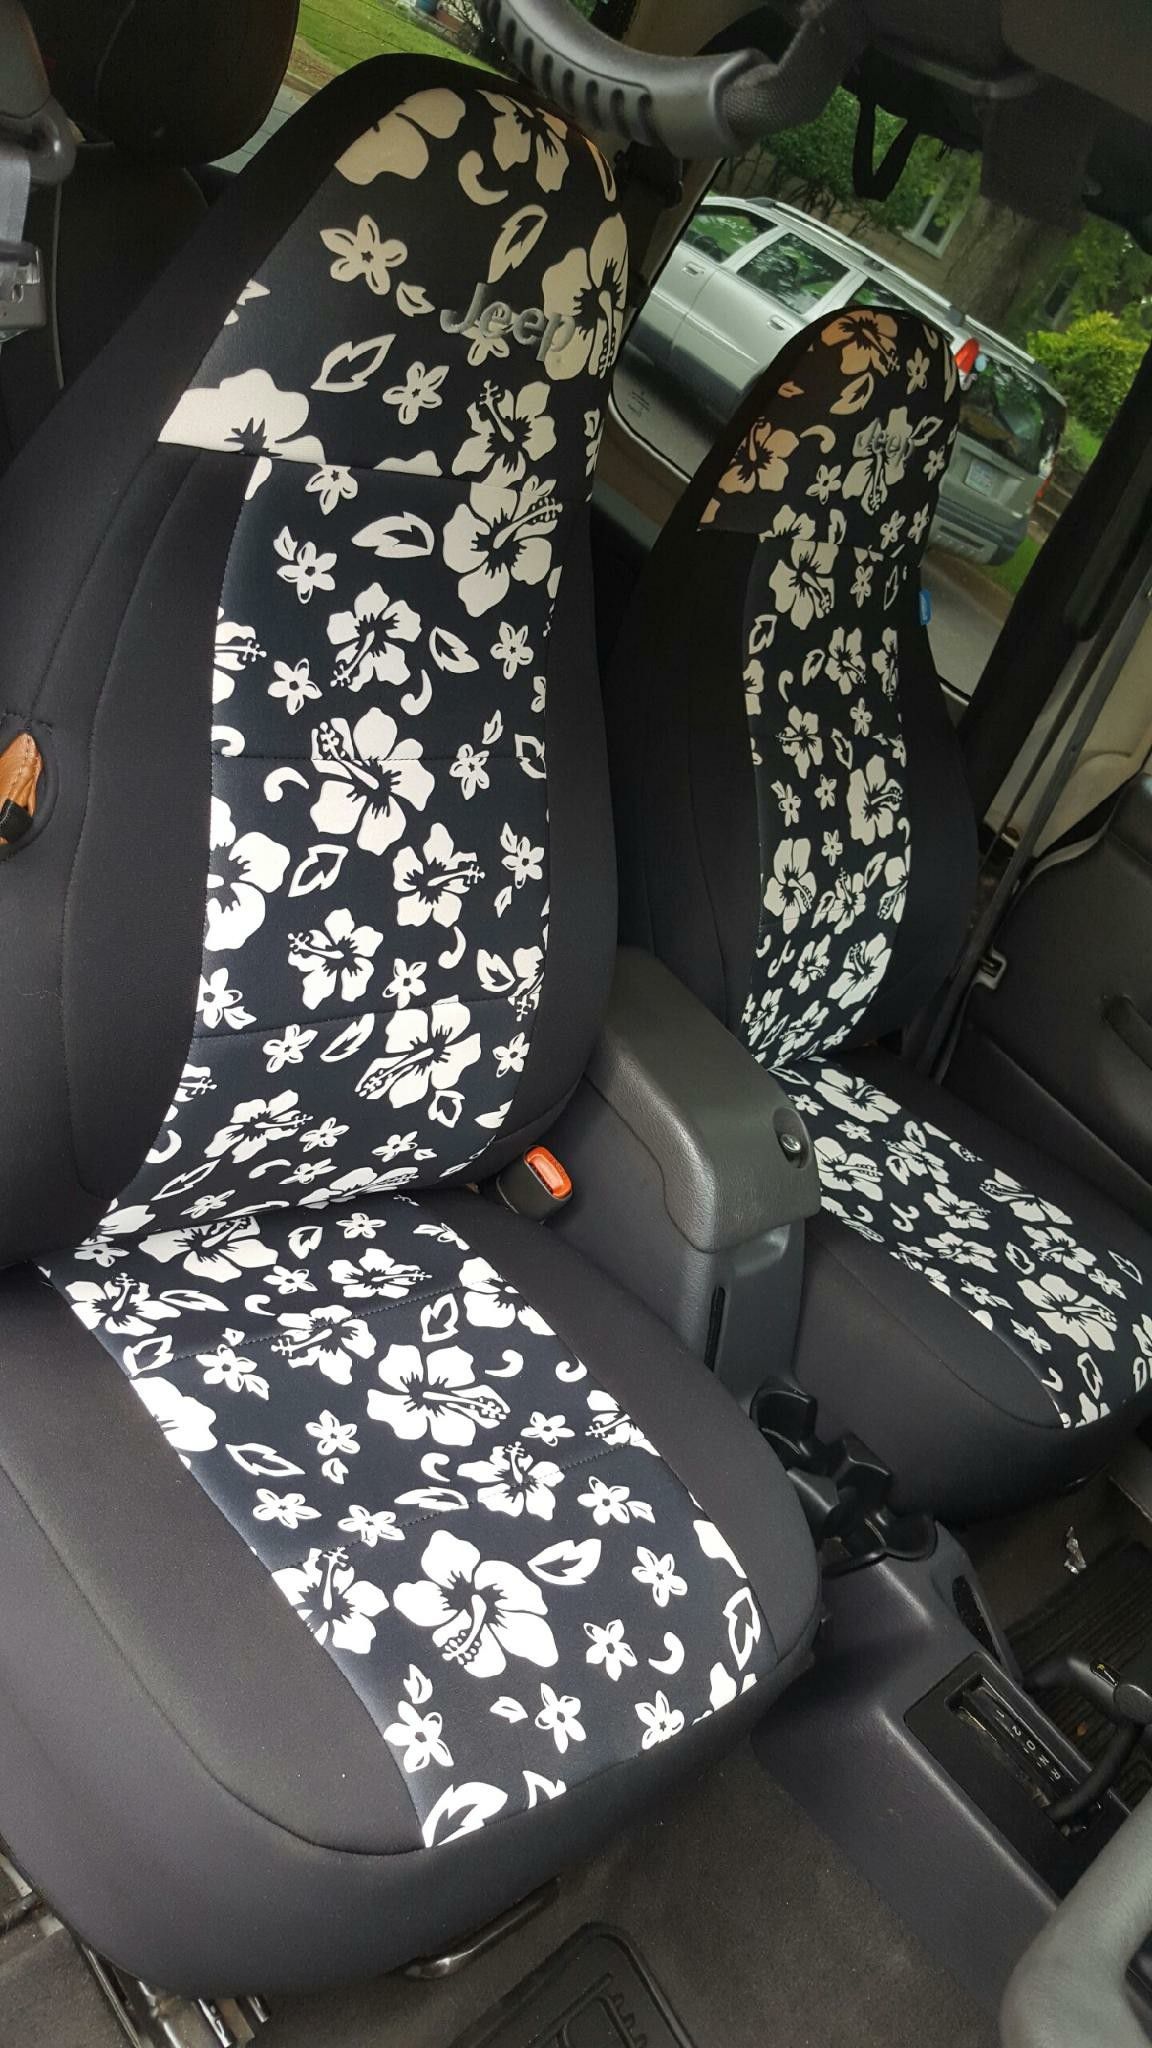 Cover King seatcovers